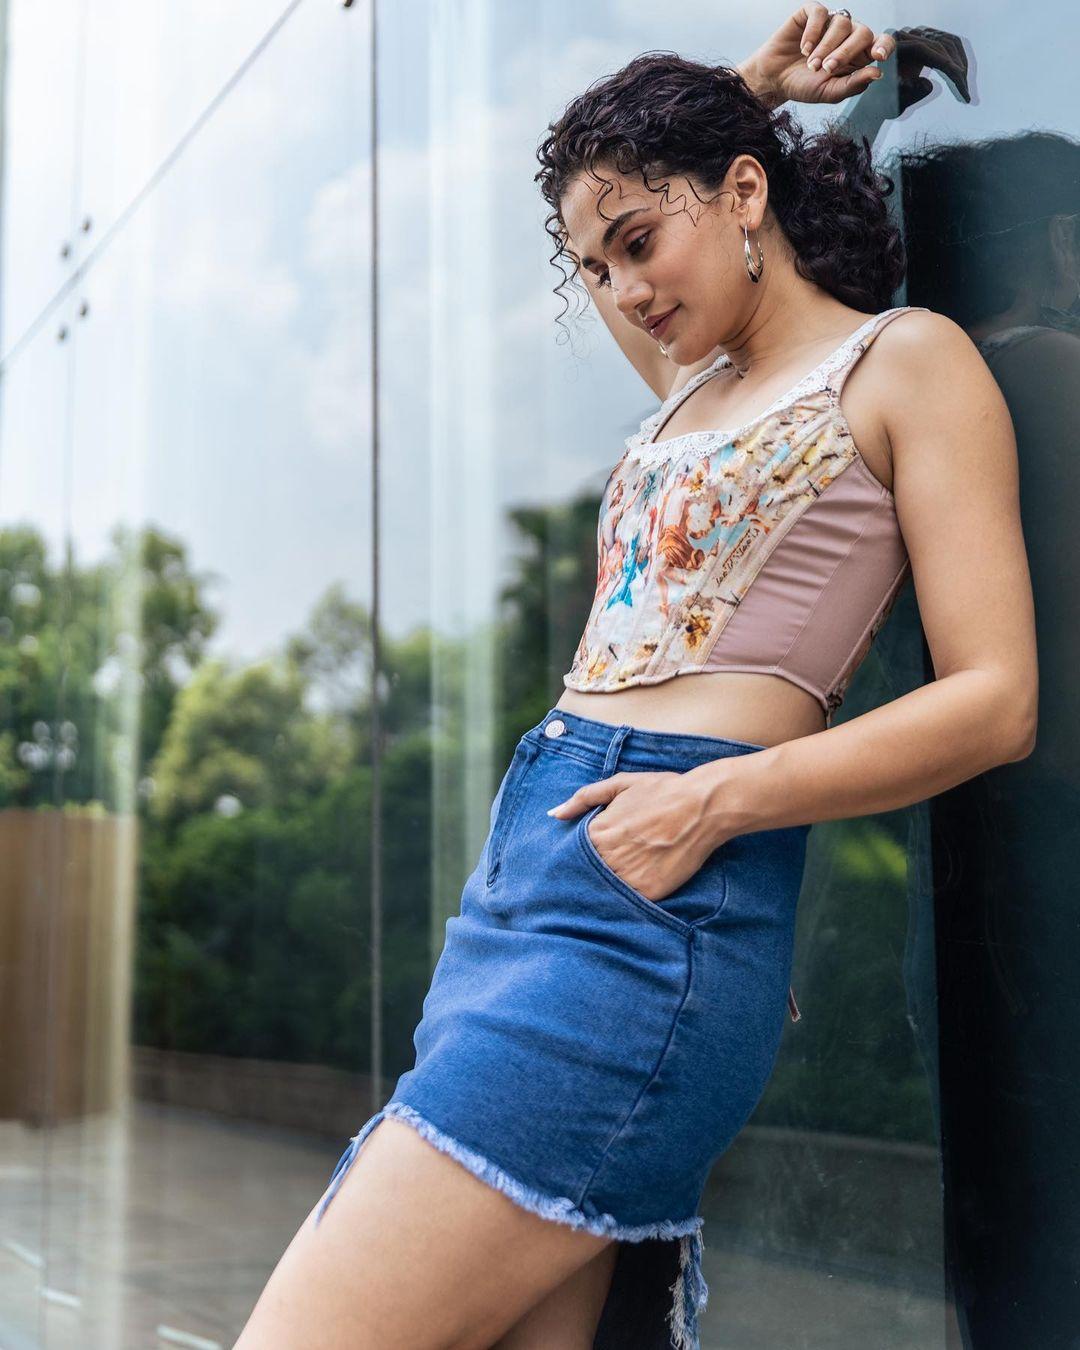 No one can ever go wrong with a denim skirt and a corset top. Taapsee excuses summer chic in this ensemble